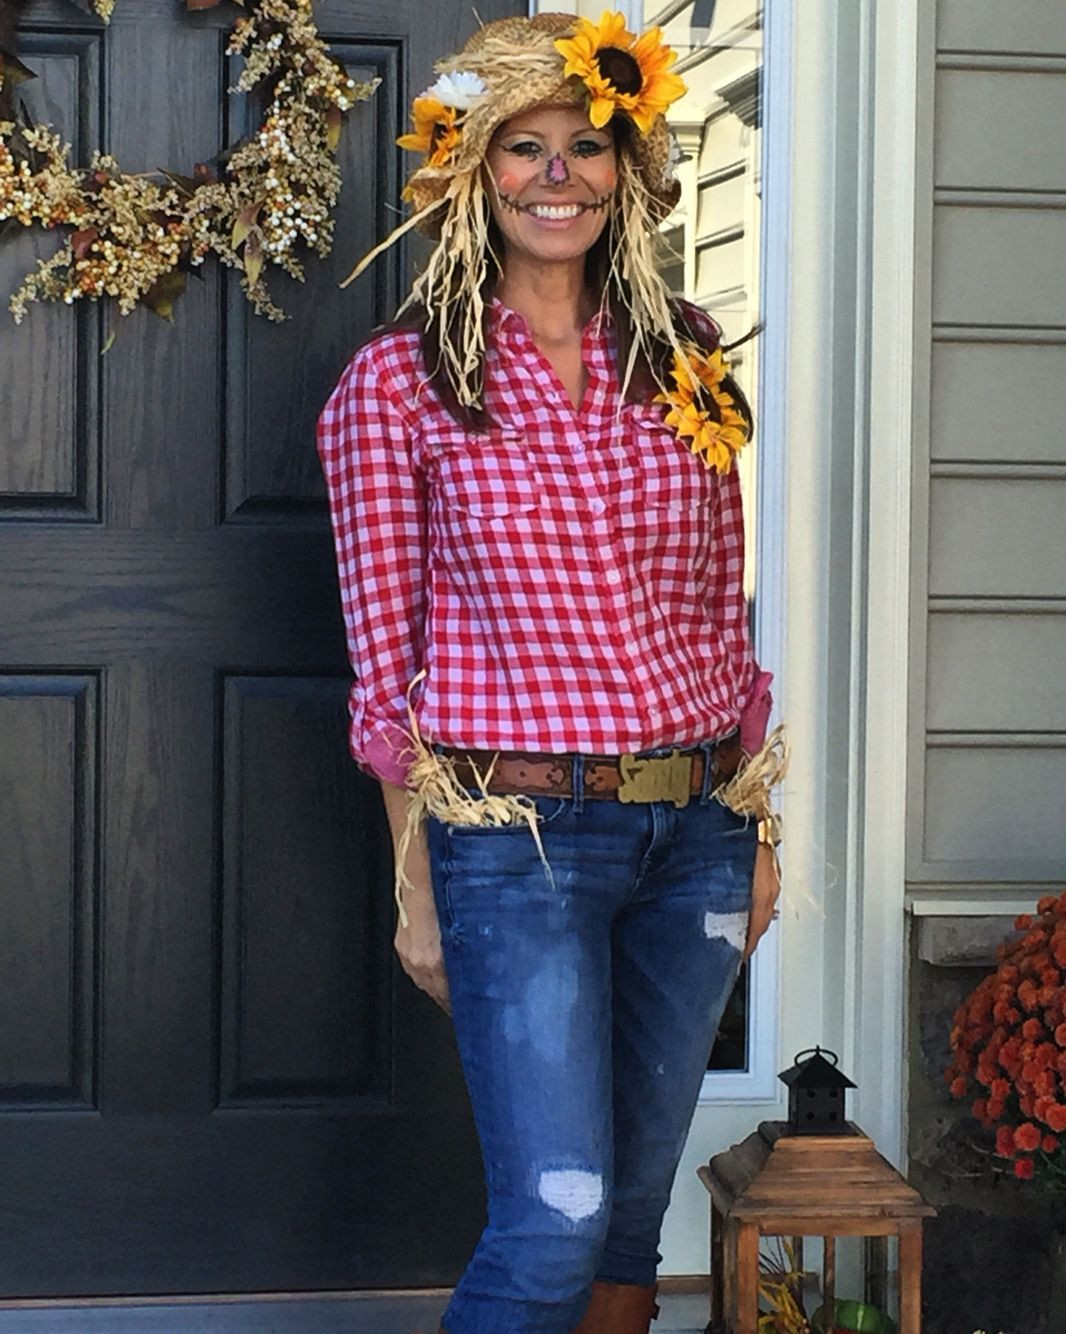 DIY Scarecrow Costume For Adults
 Scarecrow costume